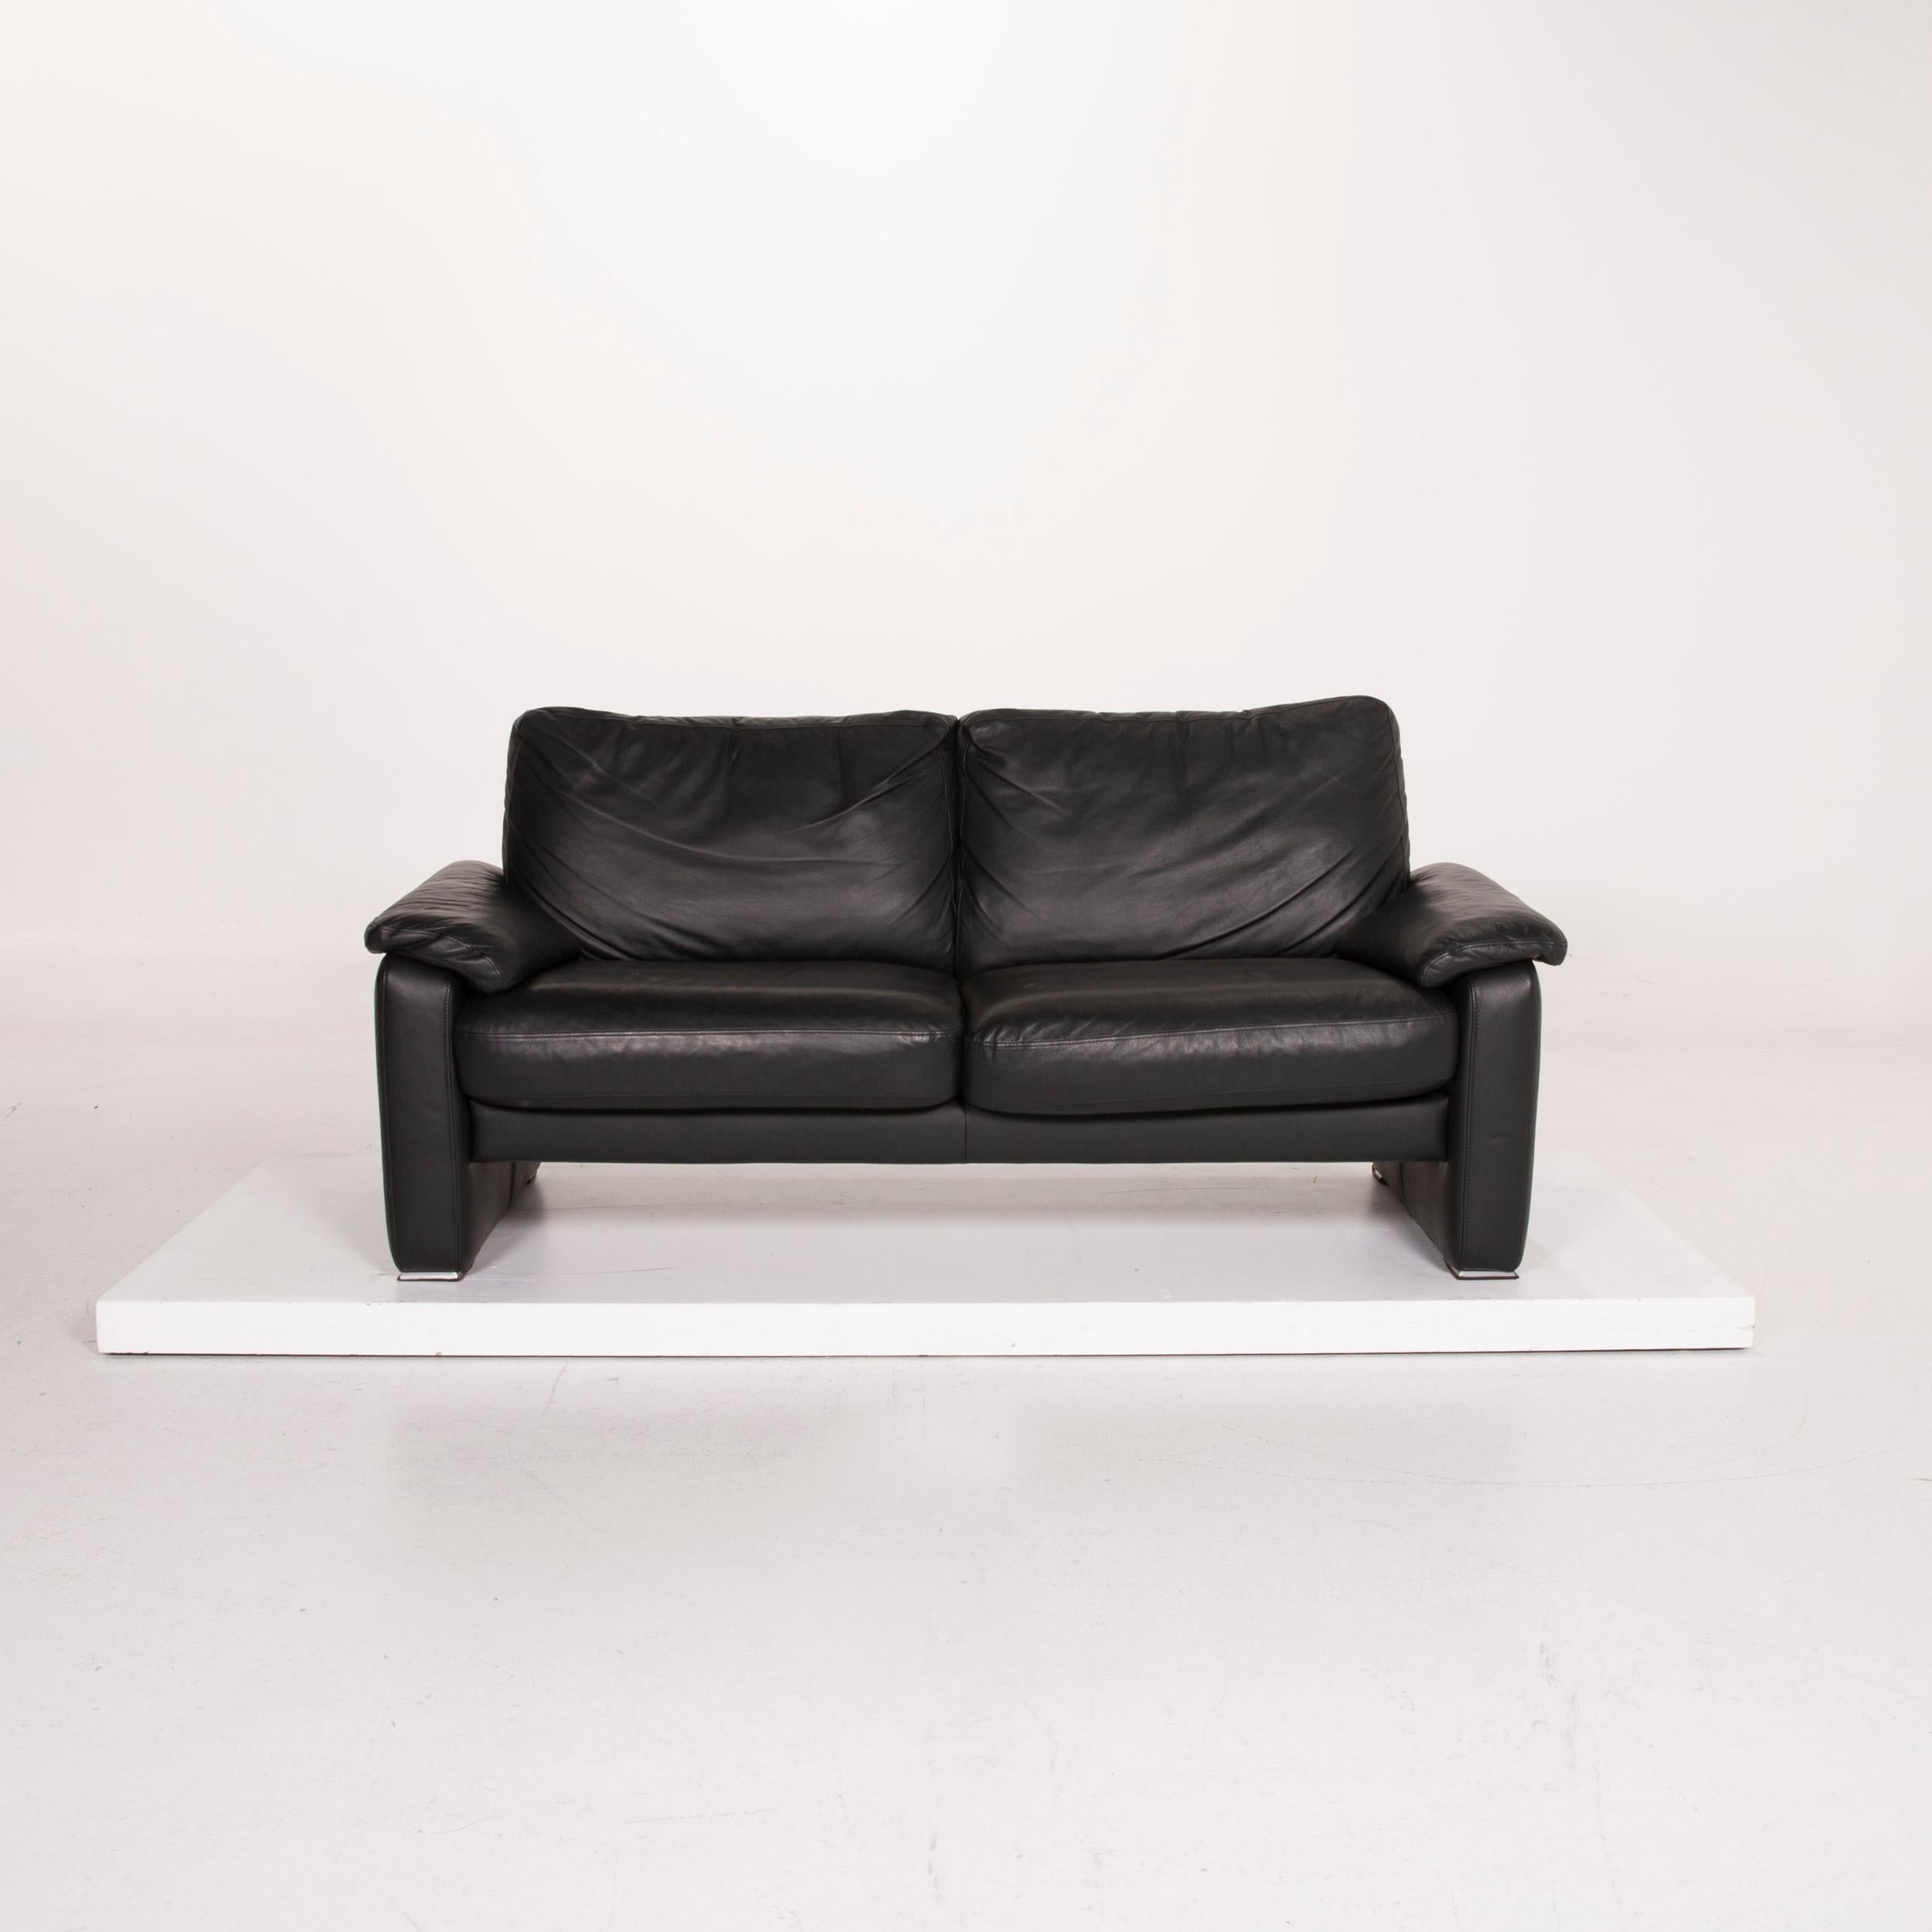 Ewald Schillig Leather Sofa Black Two-Seat For Sale 1